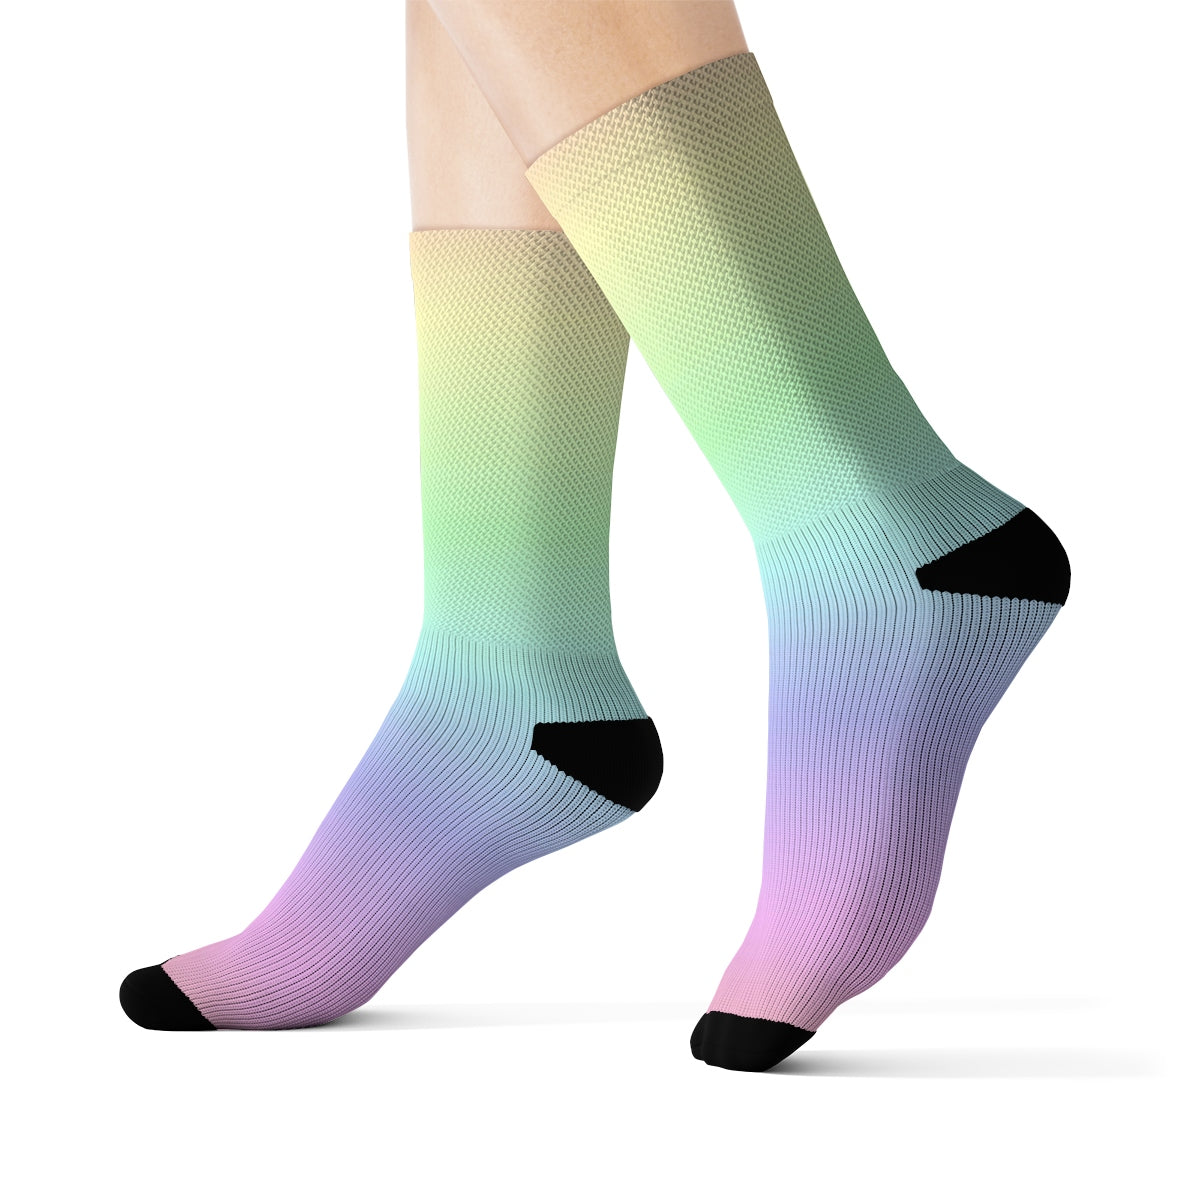 Pastel Rainbow 3D Socks, Ombre Gradient Tie Dye Kawaii Goth Pink Printed Sublimation Women Men Fun Novelty Cool Funky Crazy Gift Starcove Fashion